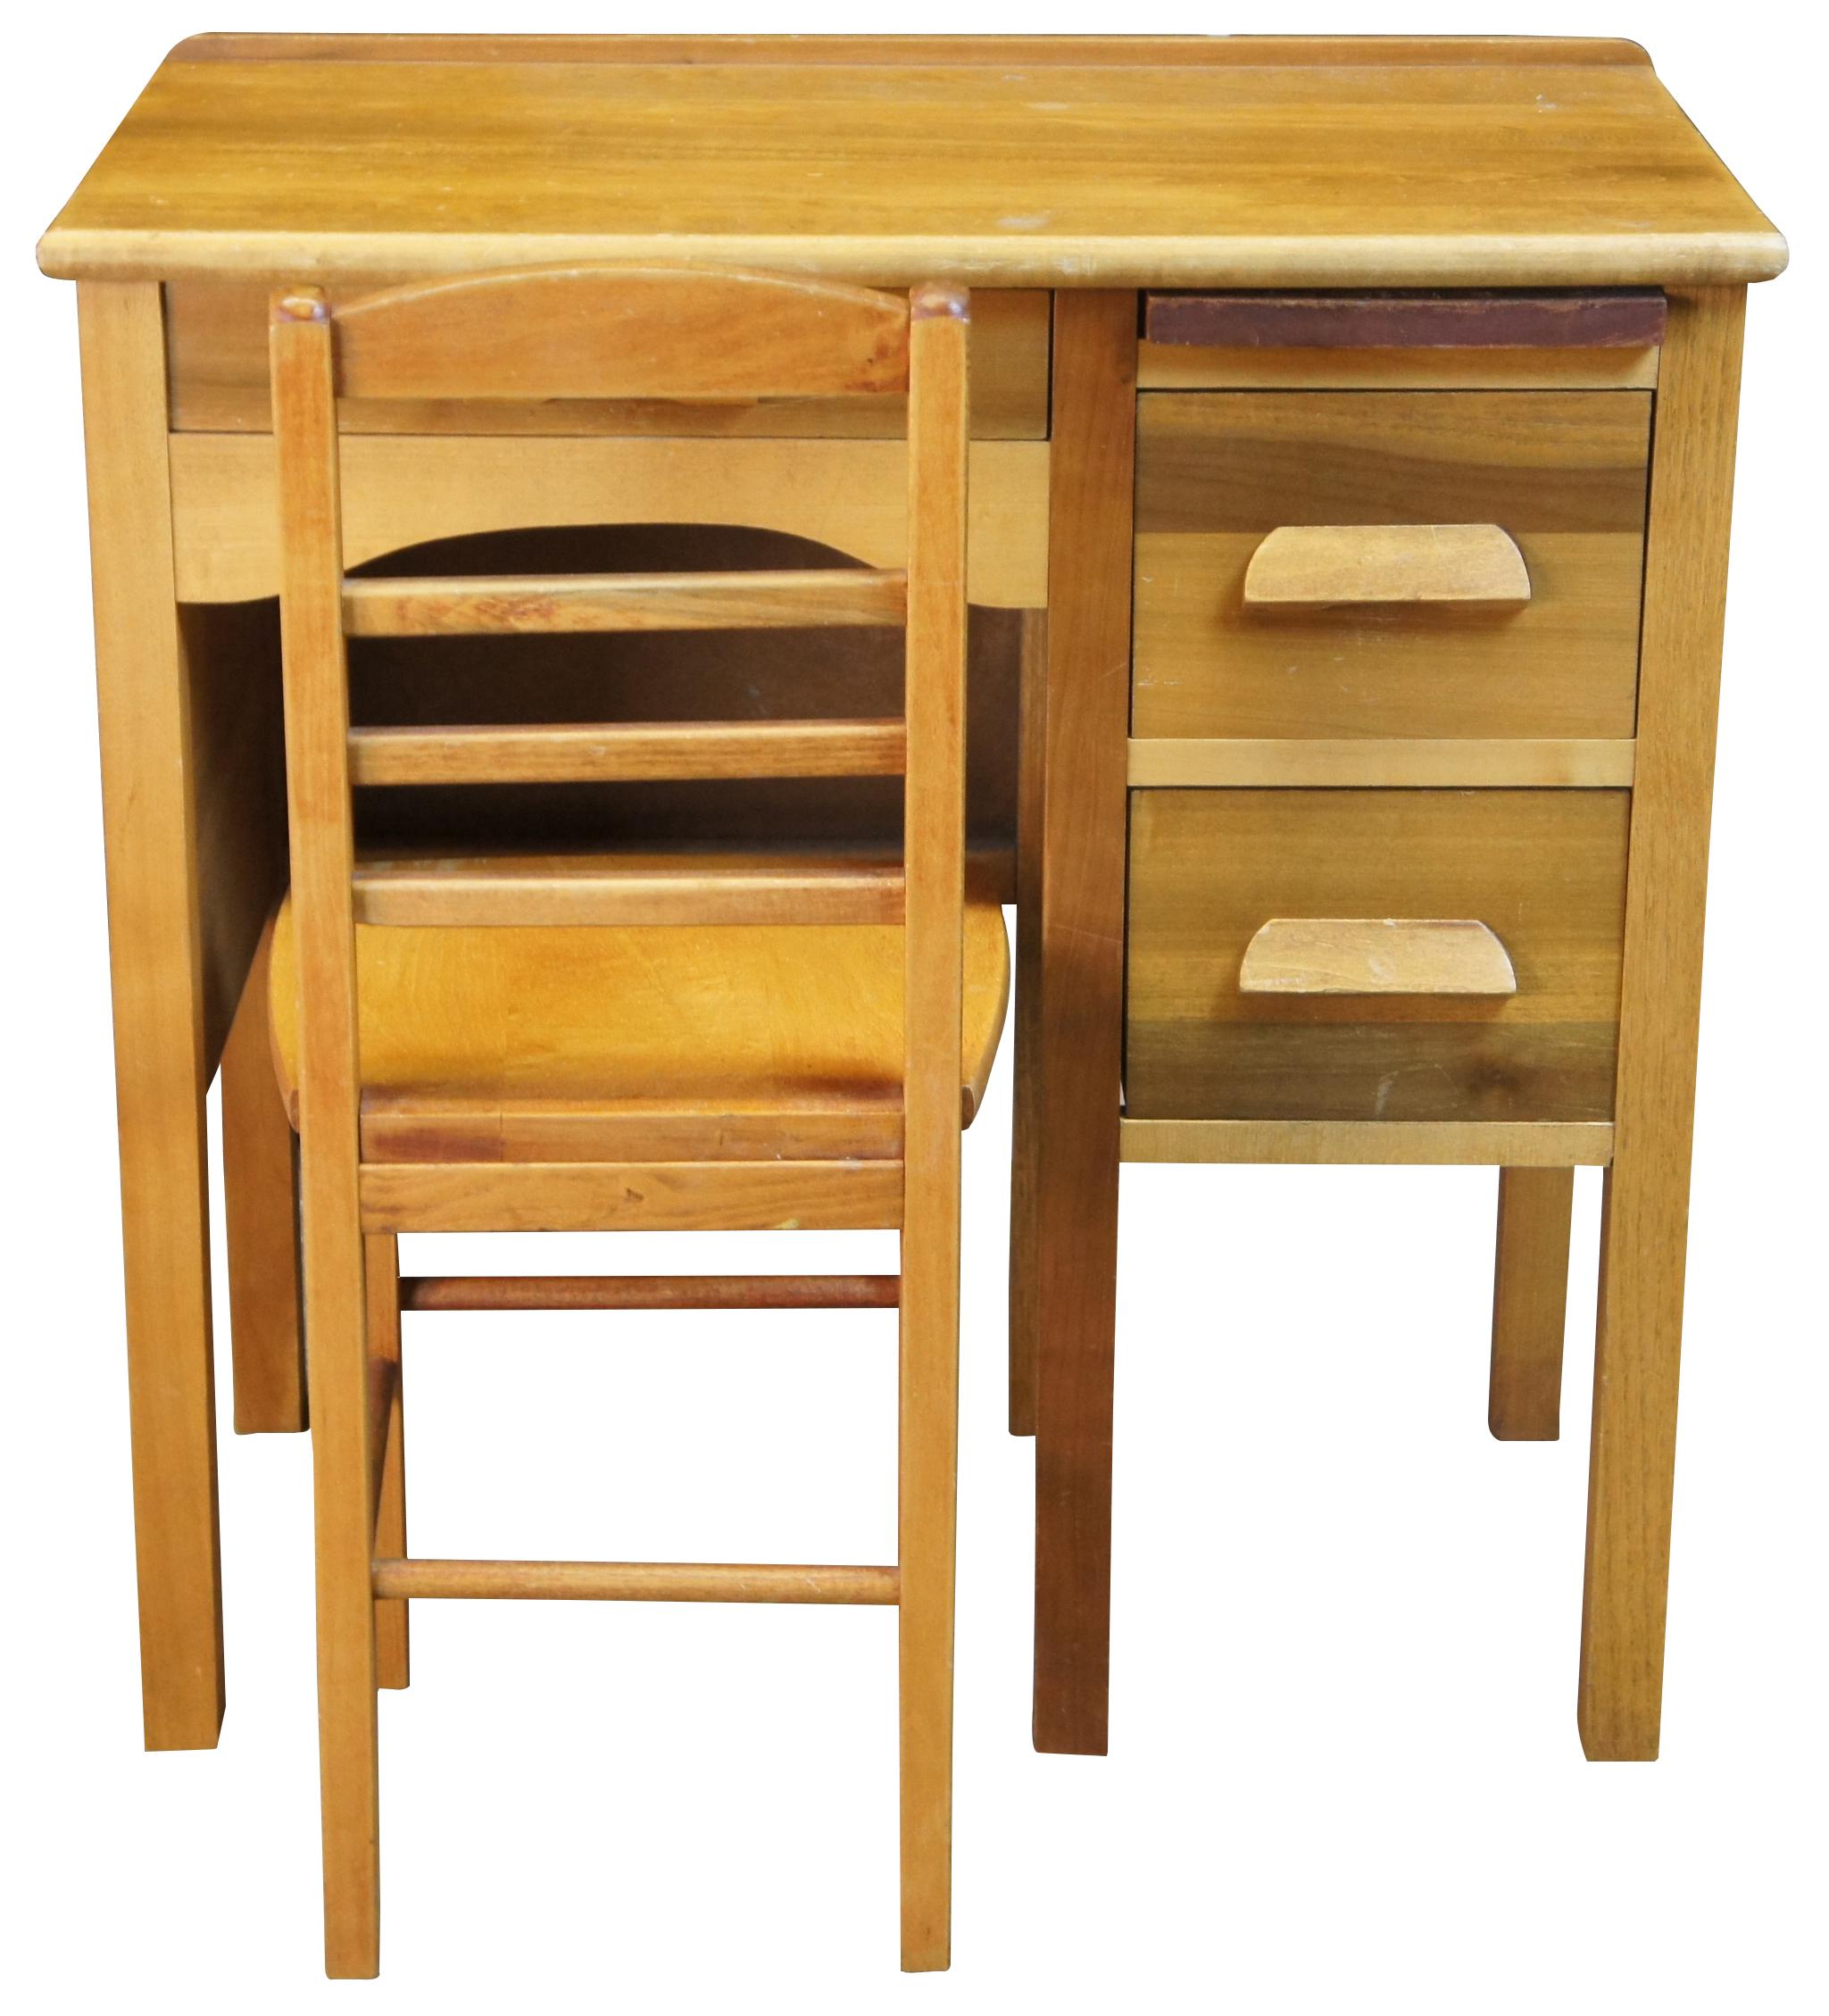 Mid 20th century child's size school desk and chair. Made from maple. Includes 3 drawers and pullout writing surface.

Measures: desk 27